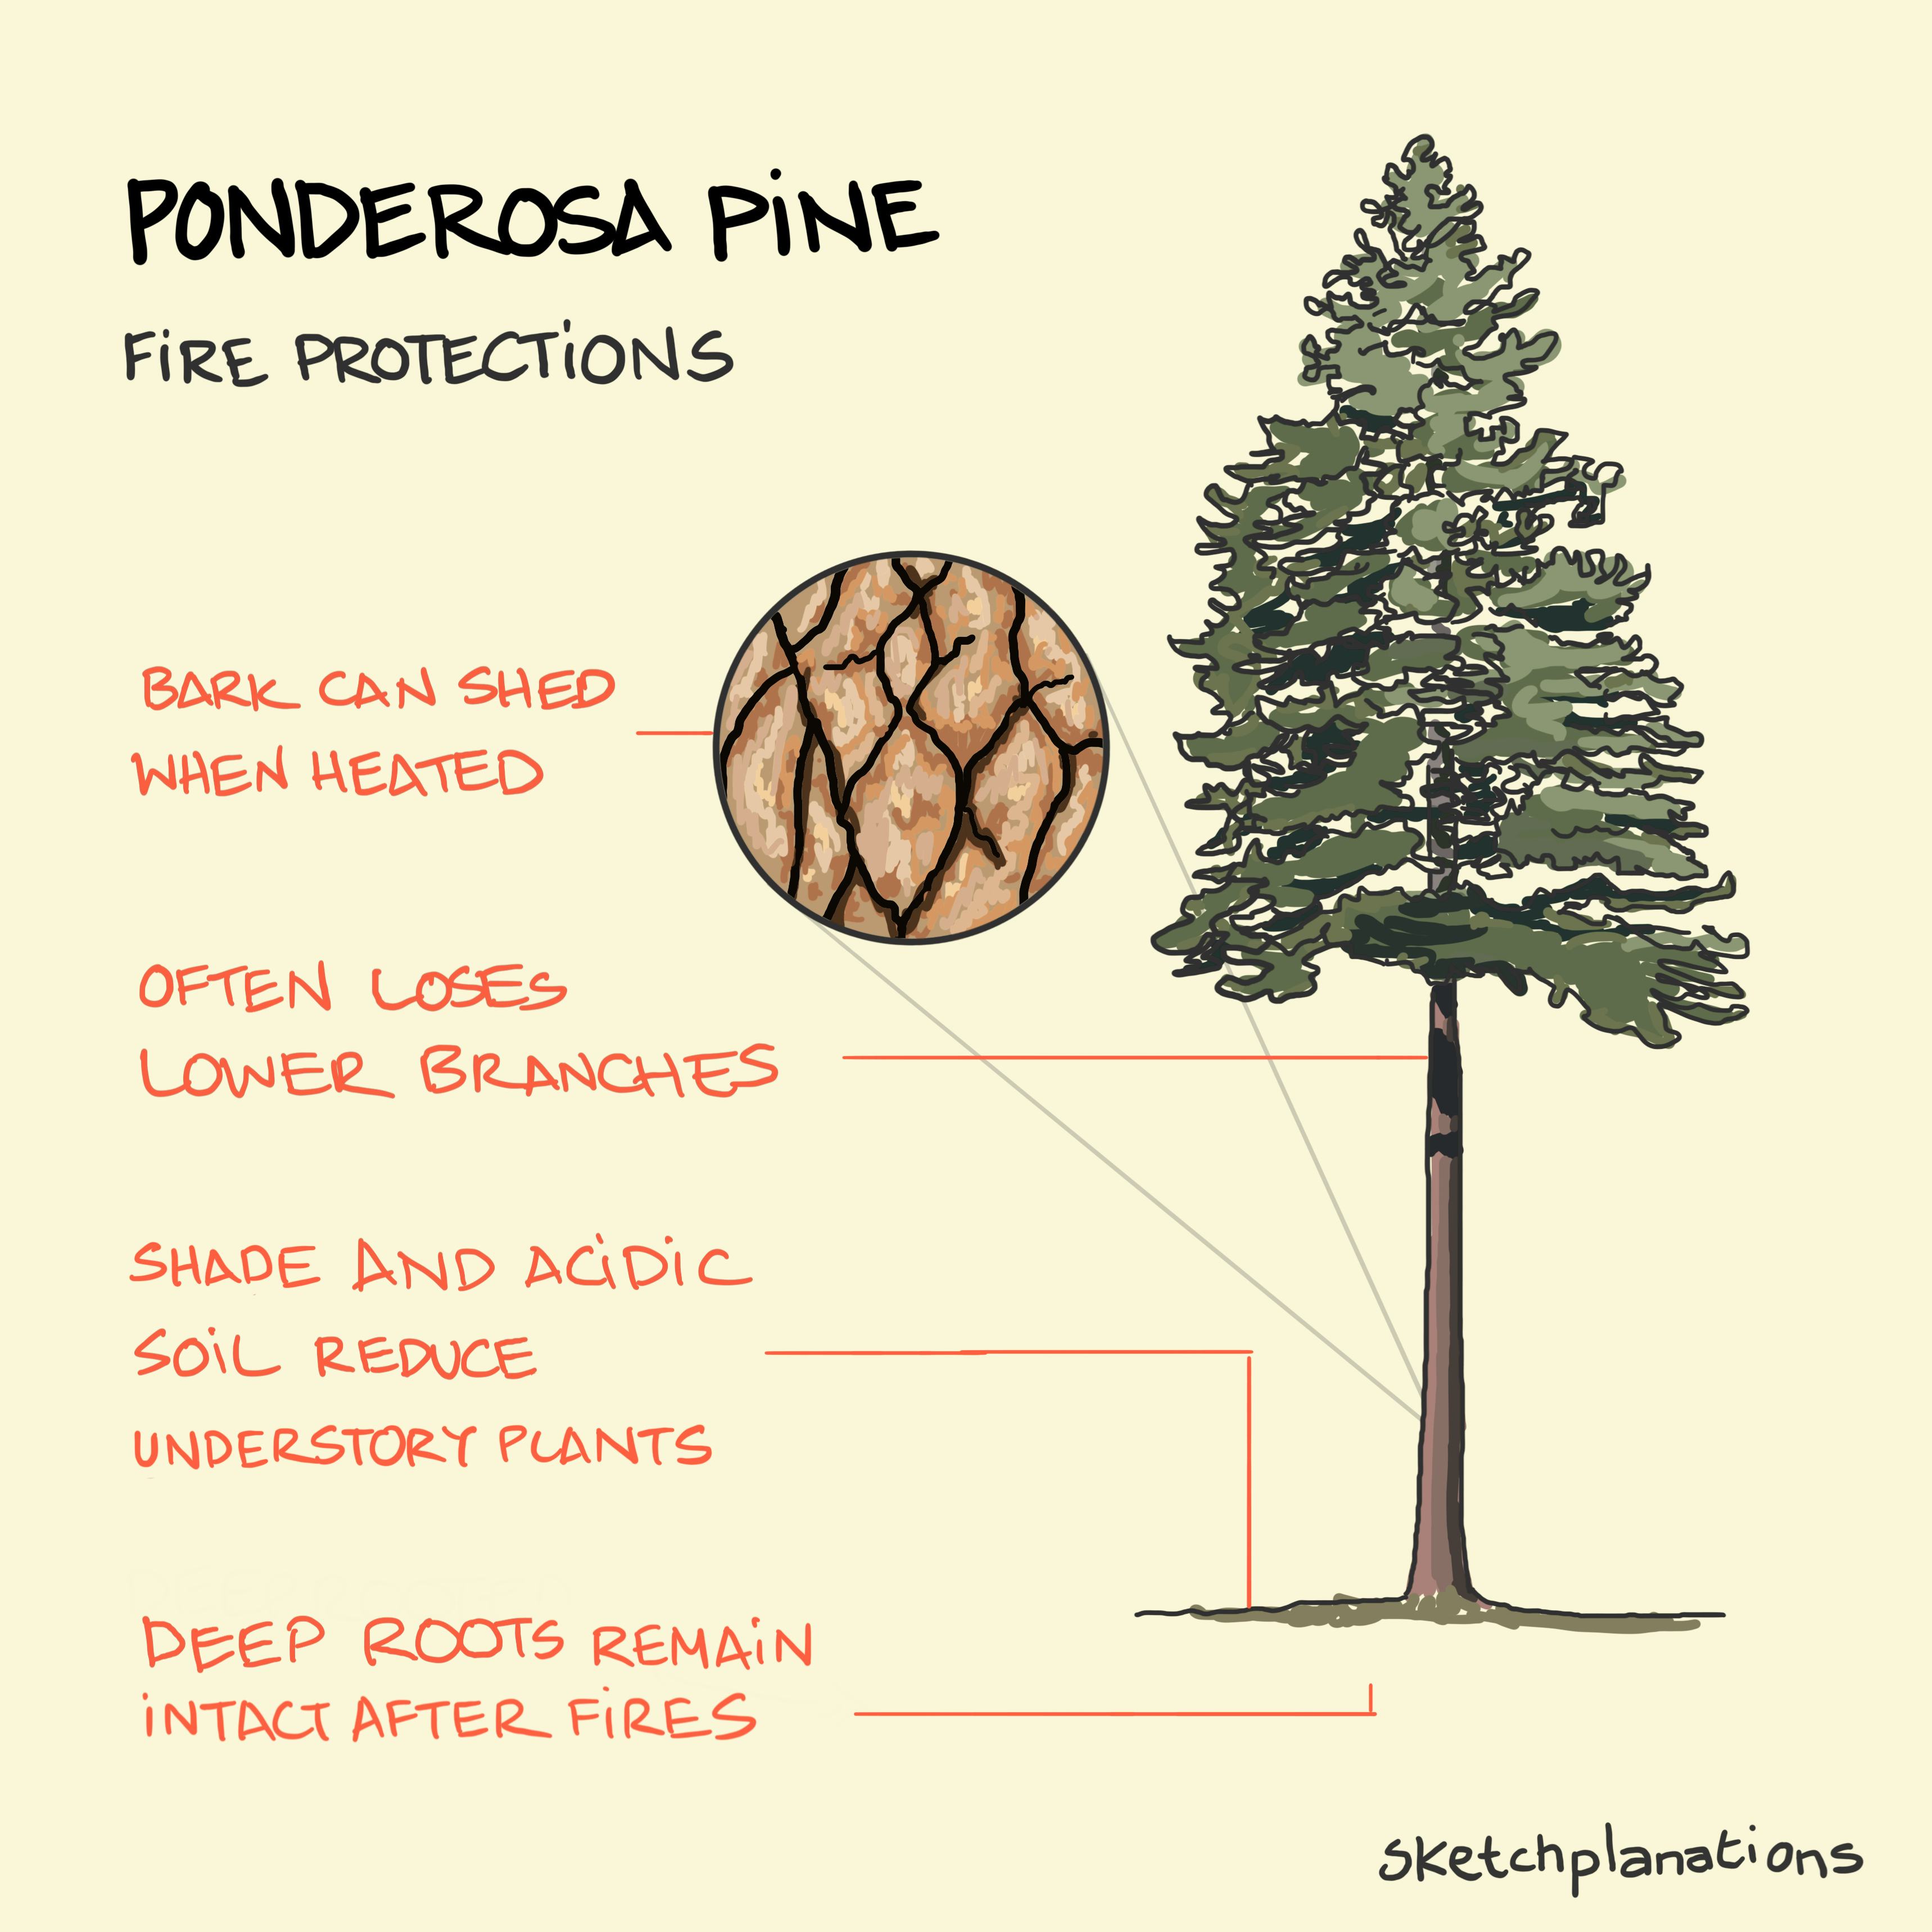 Ponderosa pine and its bark listing out some of the fire protections it has